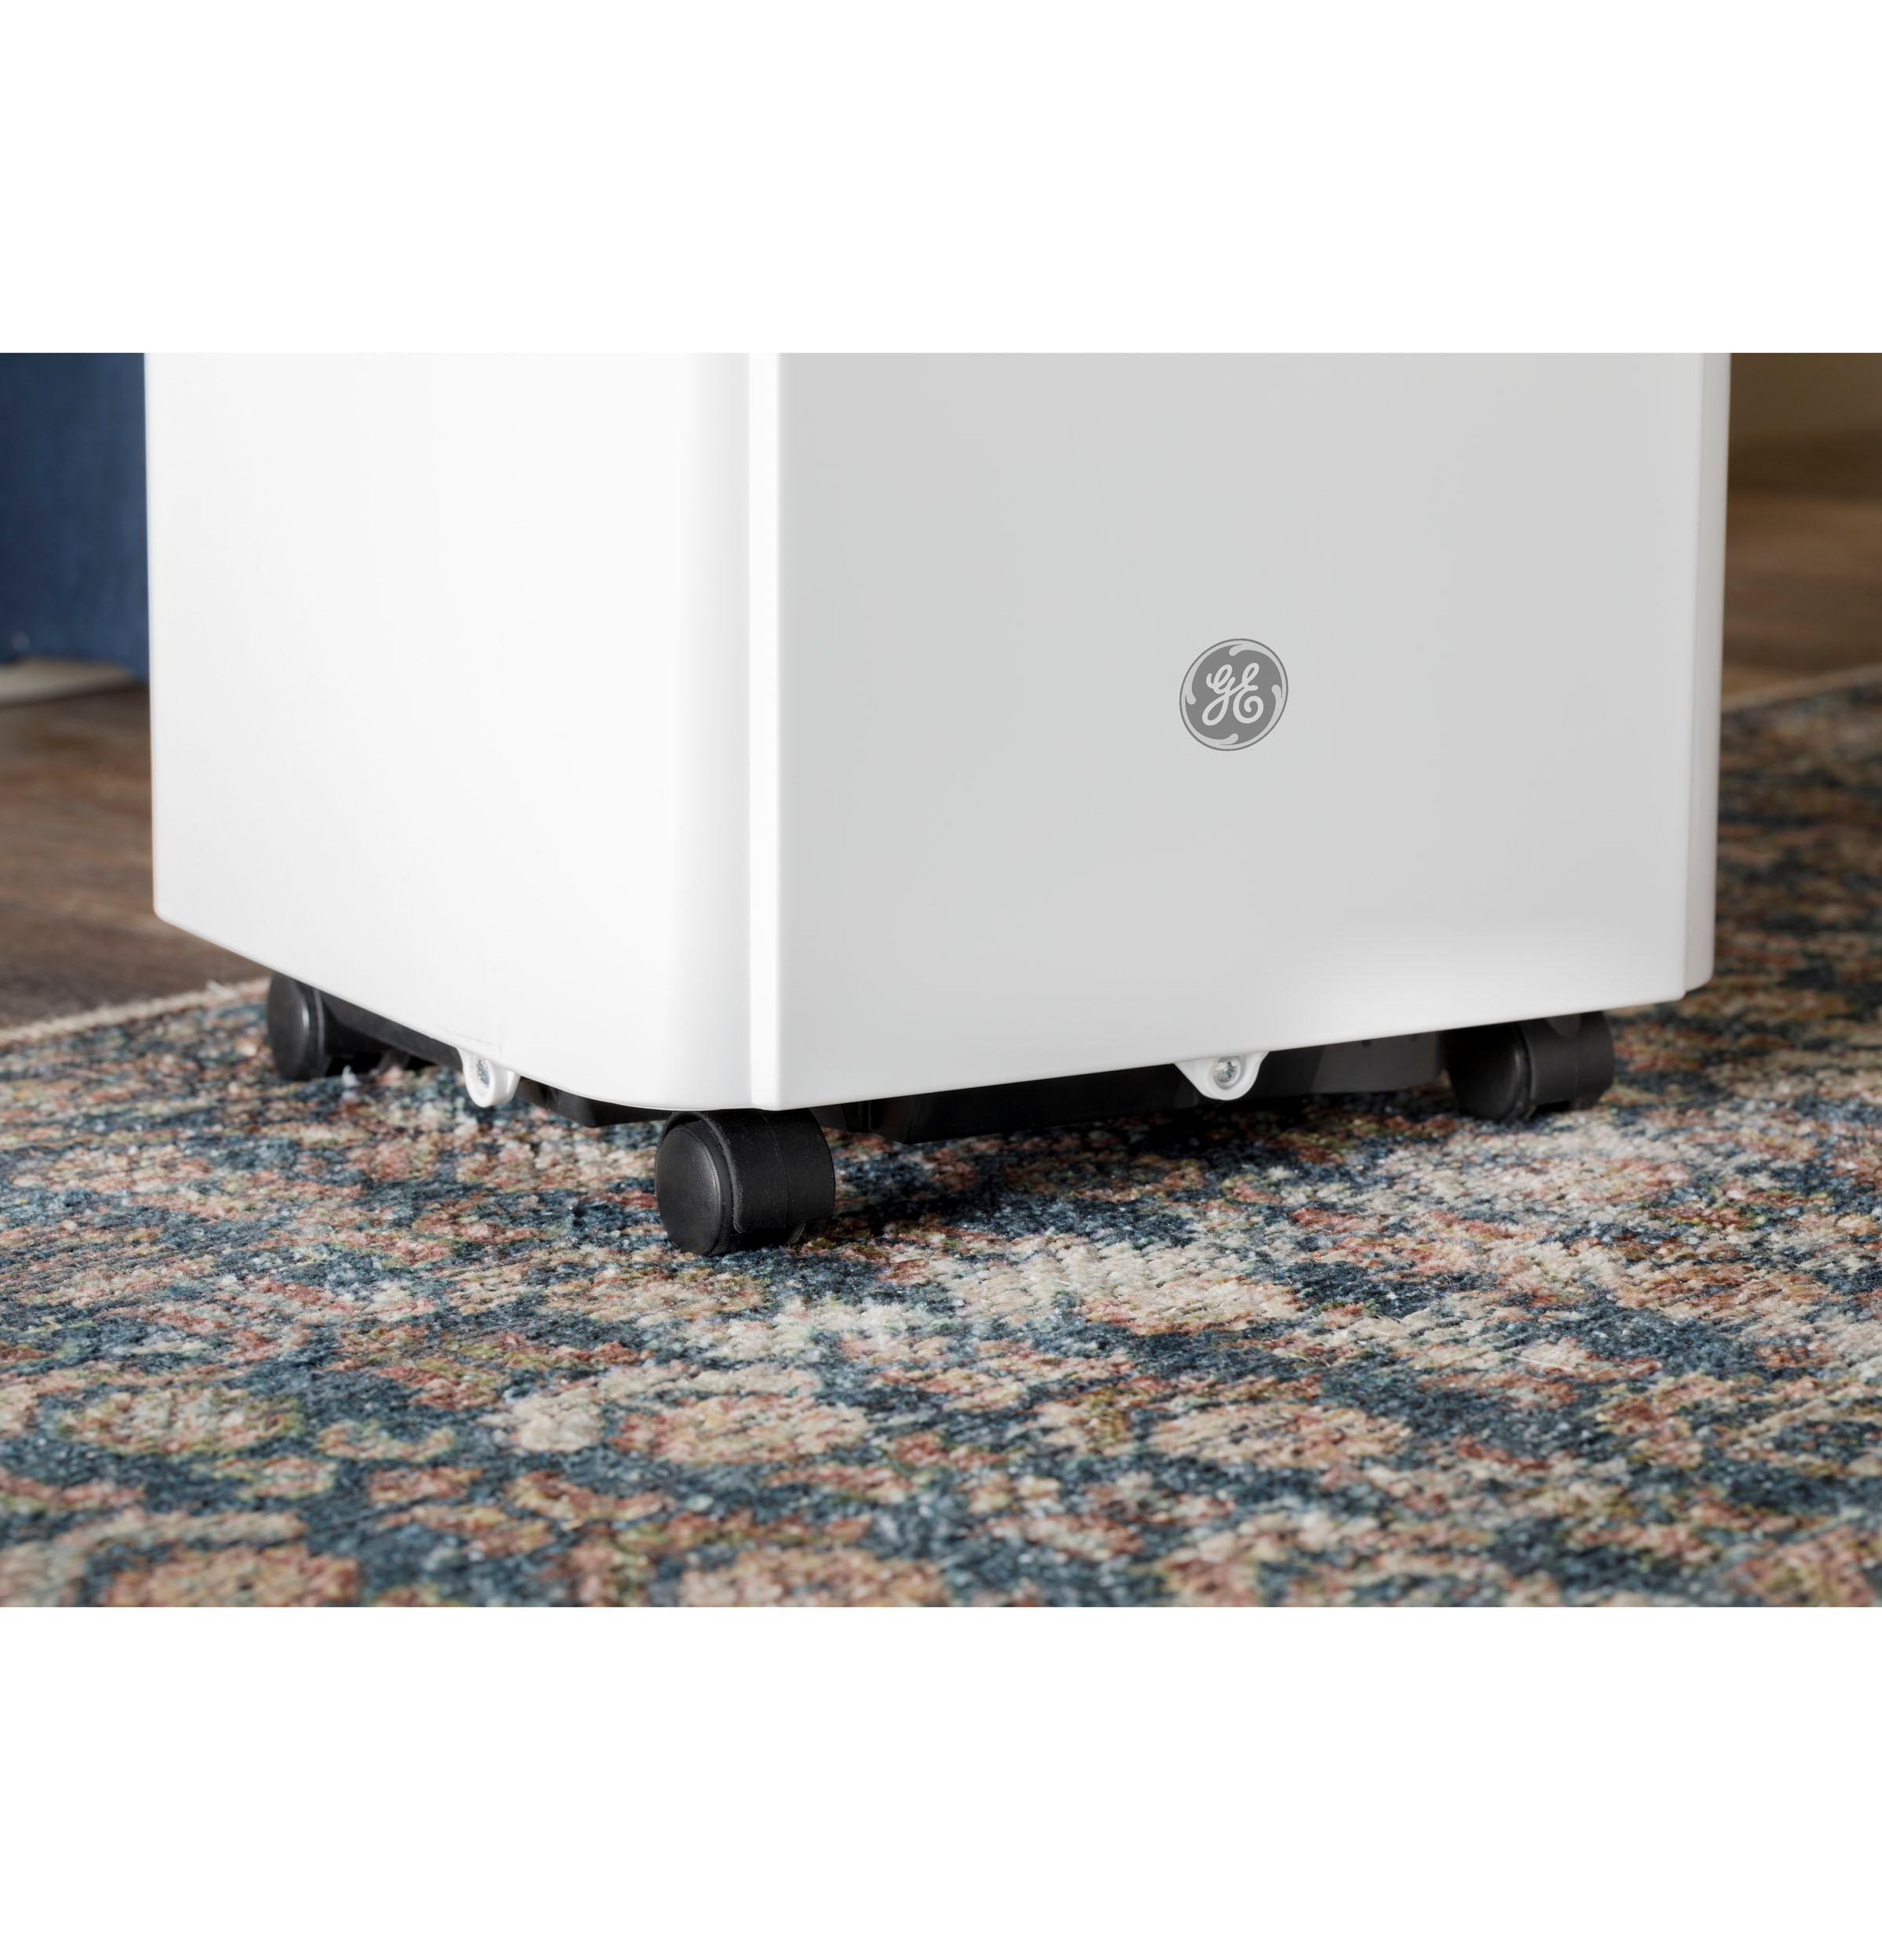 GE® 9,000 BTU Portable Air Conditioner for Small Rooms up to 250 sq ft. (6,250 BTU SACC)